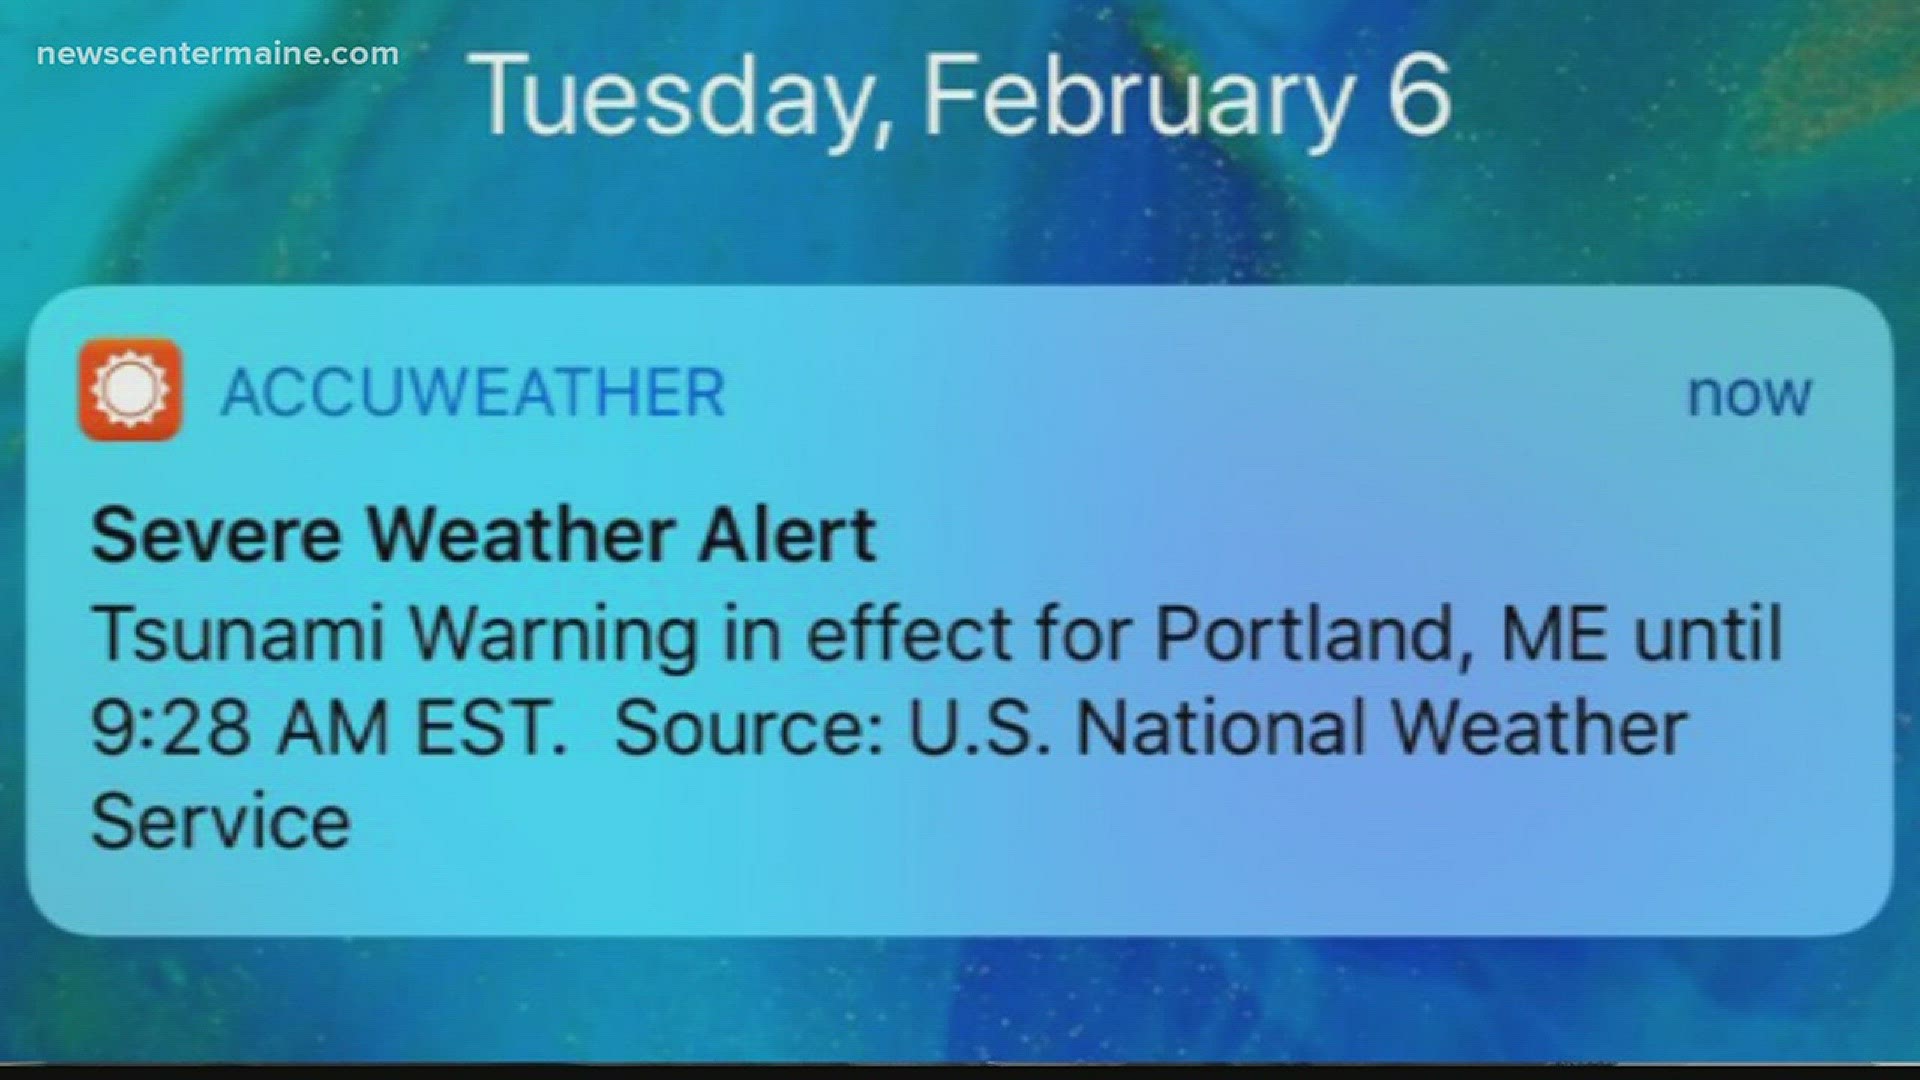 Push alert missing one crucial word: test